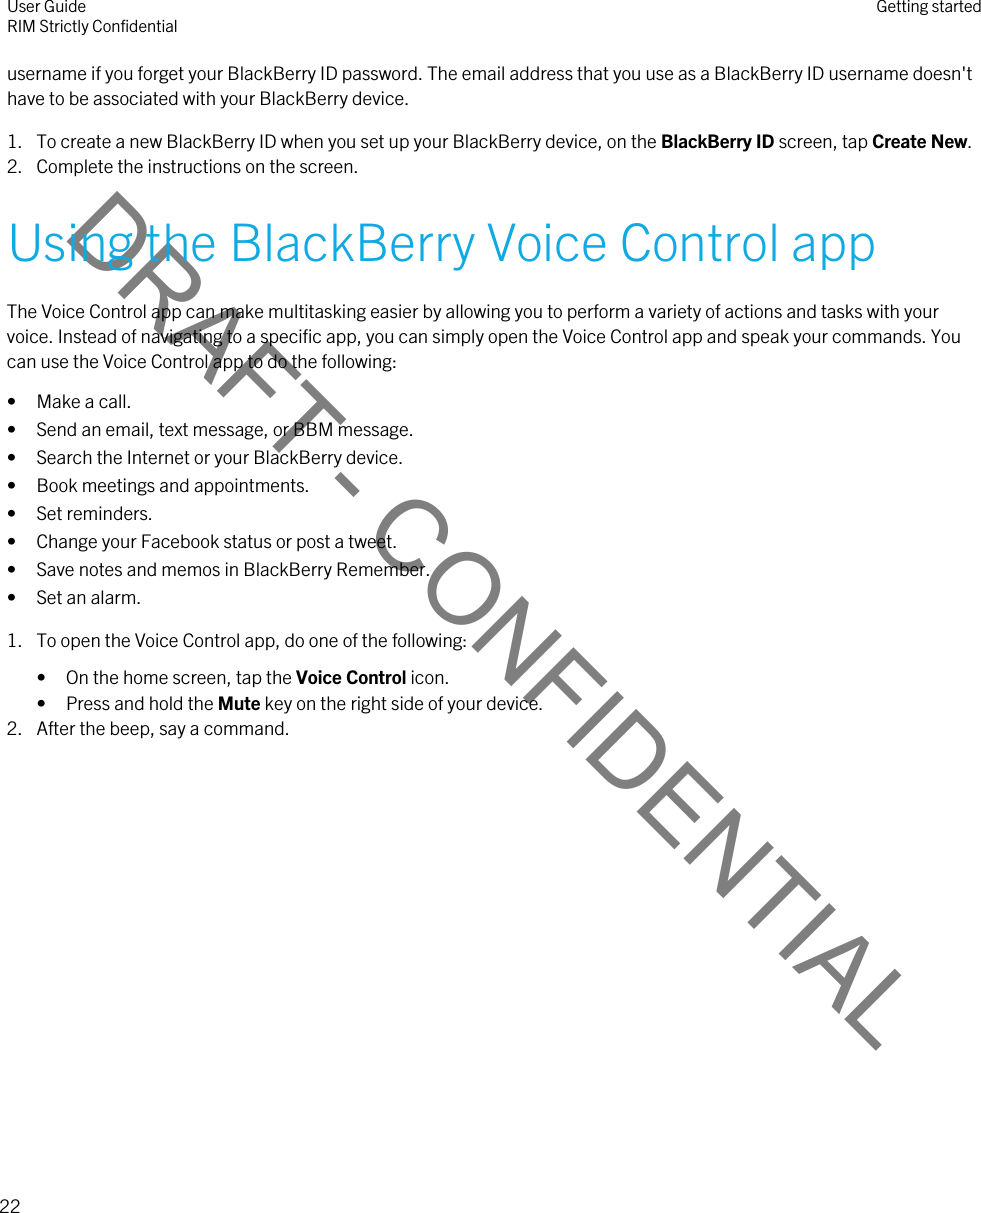 DRAFT - CONFIDENTIALusername if you forget your BlackBerry ID password. The email address that you use as a BlackBerry ID username doesn&apos;t have to be associated with your BlackBerry device.1. To create a new BlackBerry ID when you set up your BlackBerry device, on the BlackBerry ID screen, tap Create New.2. Complete the instructions on the screen.Using the BlackBerry Voice Control appThe Voice Control app can make multitasking easier by allowing you to perform a variety of actions and tasks with your voice. Instead of navigating to a specific app, you can simply open the Voice Control app and speak your commands. You can use the Voice Control app to do the following:• Make a call.• Send an email, text message, or BBM message.• Search the Internet or your BlackBerry device.• Book meetings and appointments.• Set reminders.• Change your Facebook status or post a tweet.• Save notes and memos in BlackBerry Remember.• Set an alarm.1. To open the Voice Control app, do one of the following:• On the home screen, tap the Voice Control icon.• Press and hold the Mute key on the right side of your device.2. After the beep, say a command.User GuideRIM Strictly Confidential Getting started22 